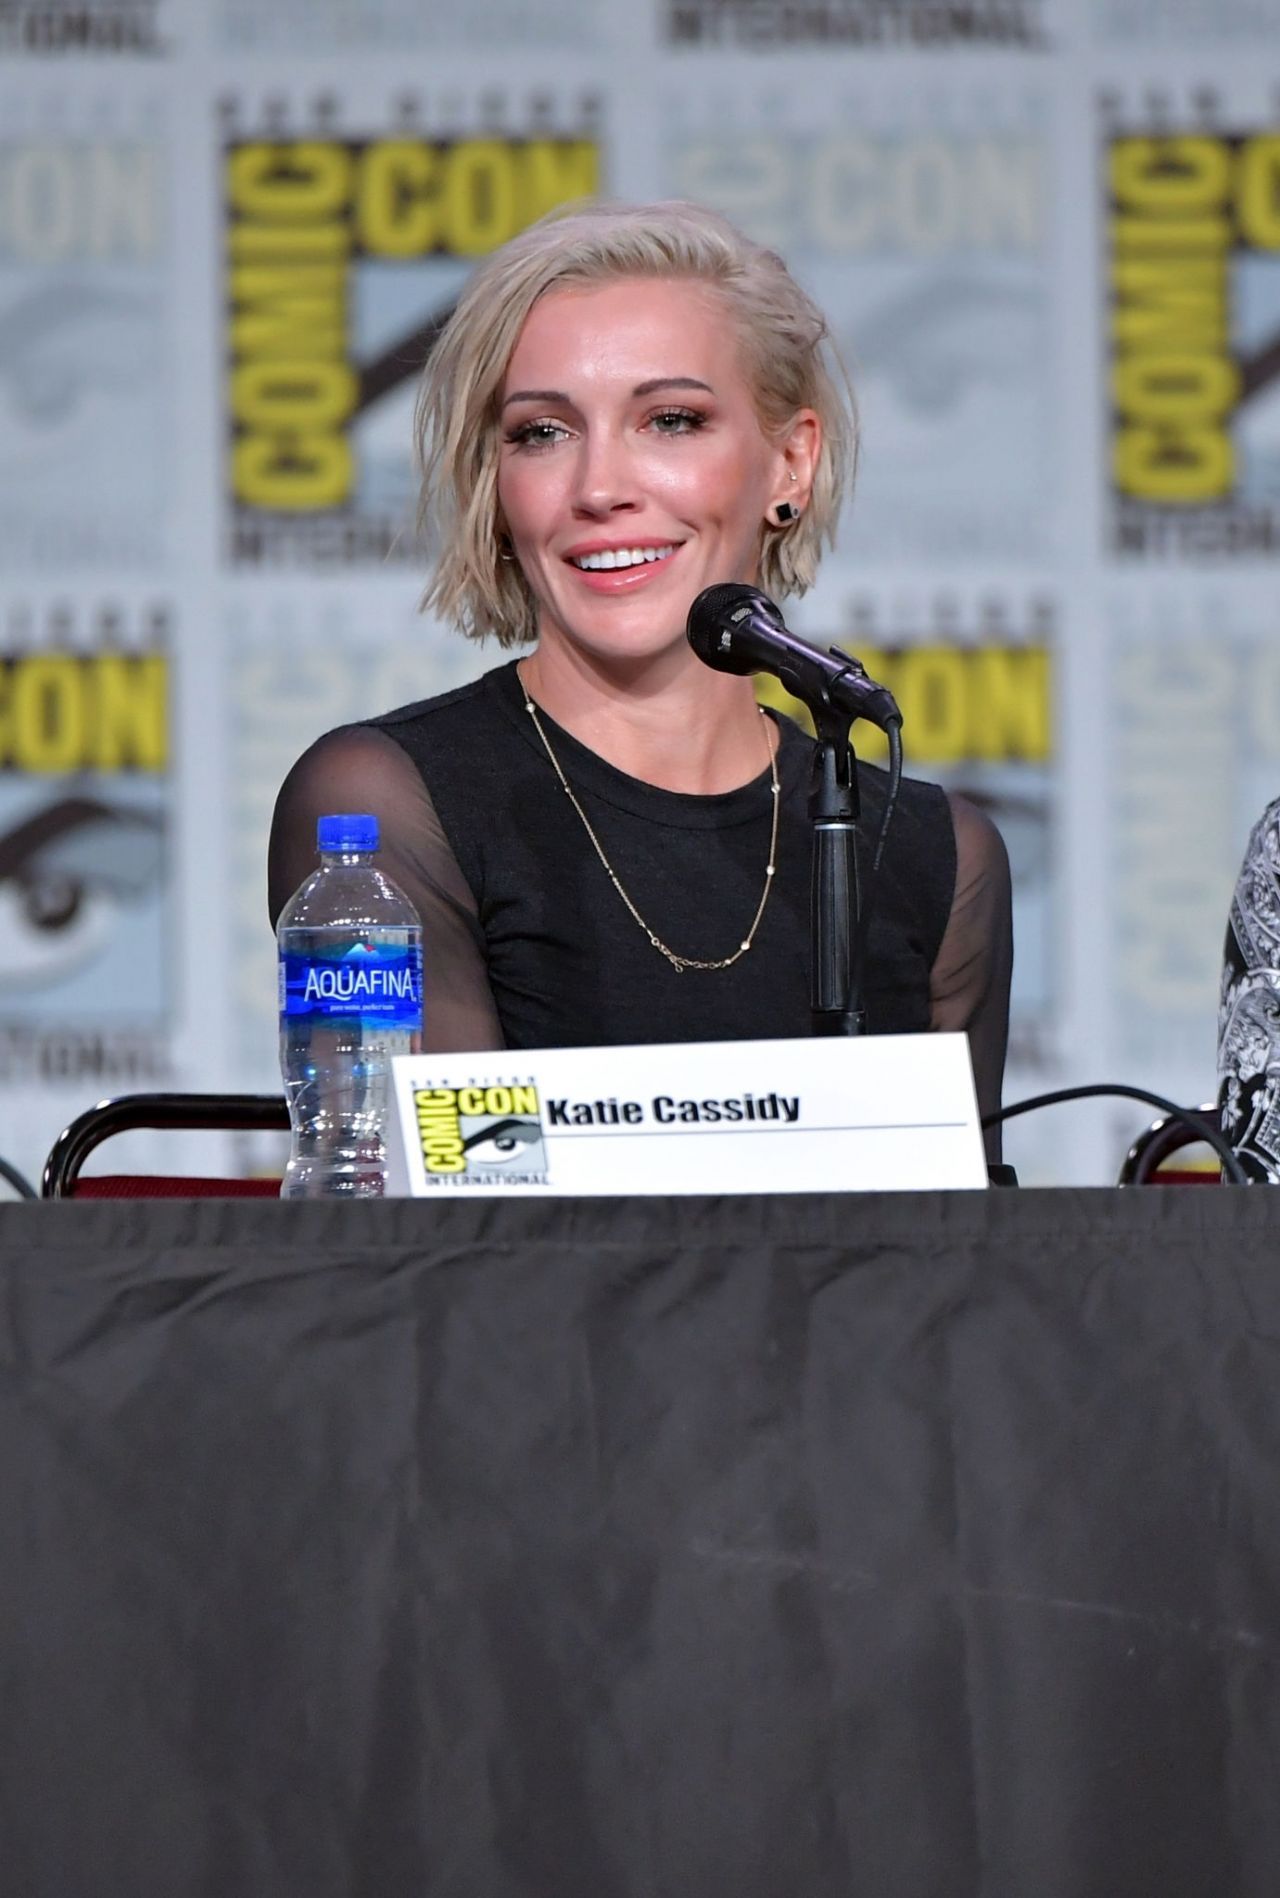 katie-cassidy-arrow-special-presentation-and-q-a-at-sdcc-2019-8.jpg